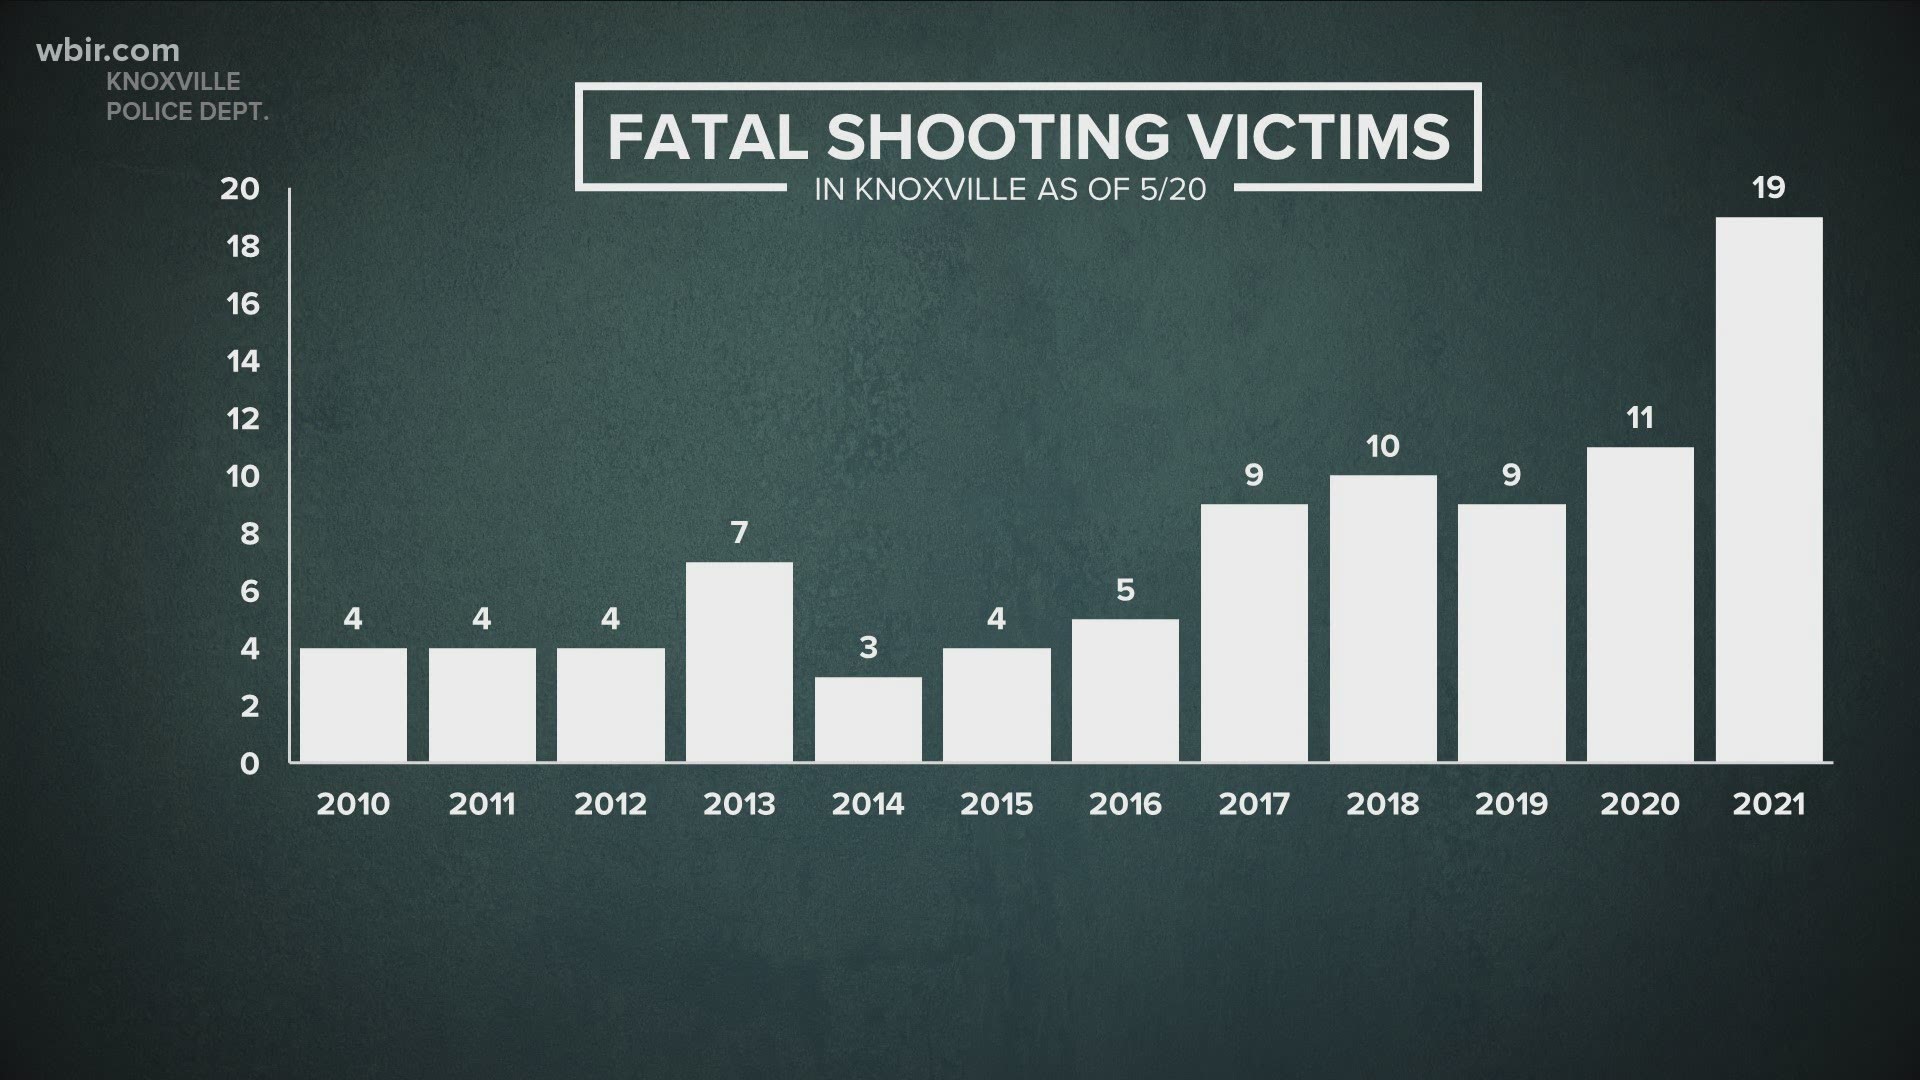 As part of WBIR's ongoing commitment to address ongoing gun violence, 10News reporter Grace King breaks down where those shootings are happening most often.